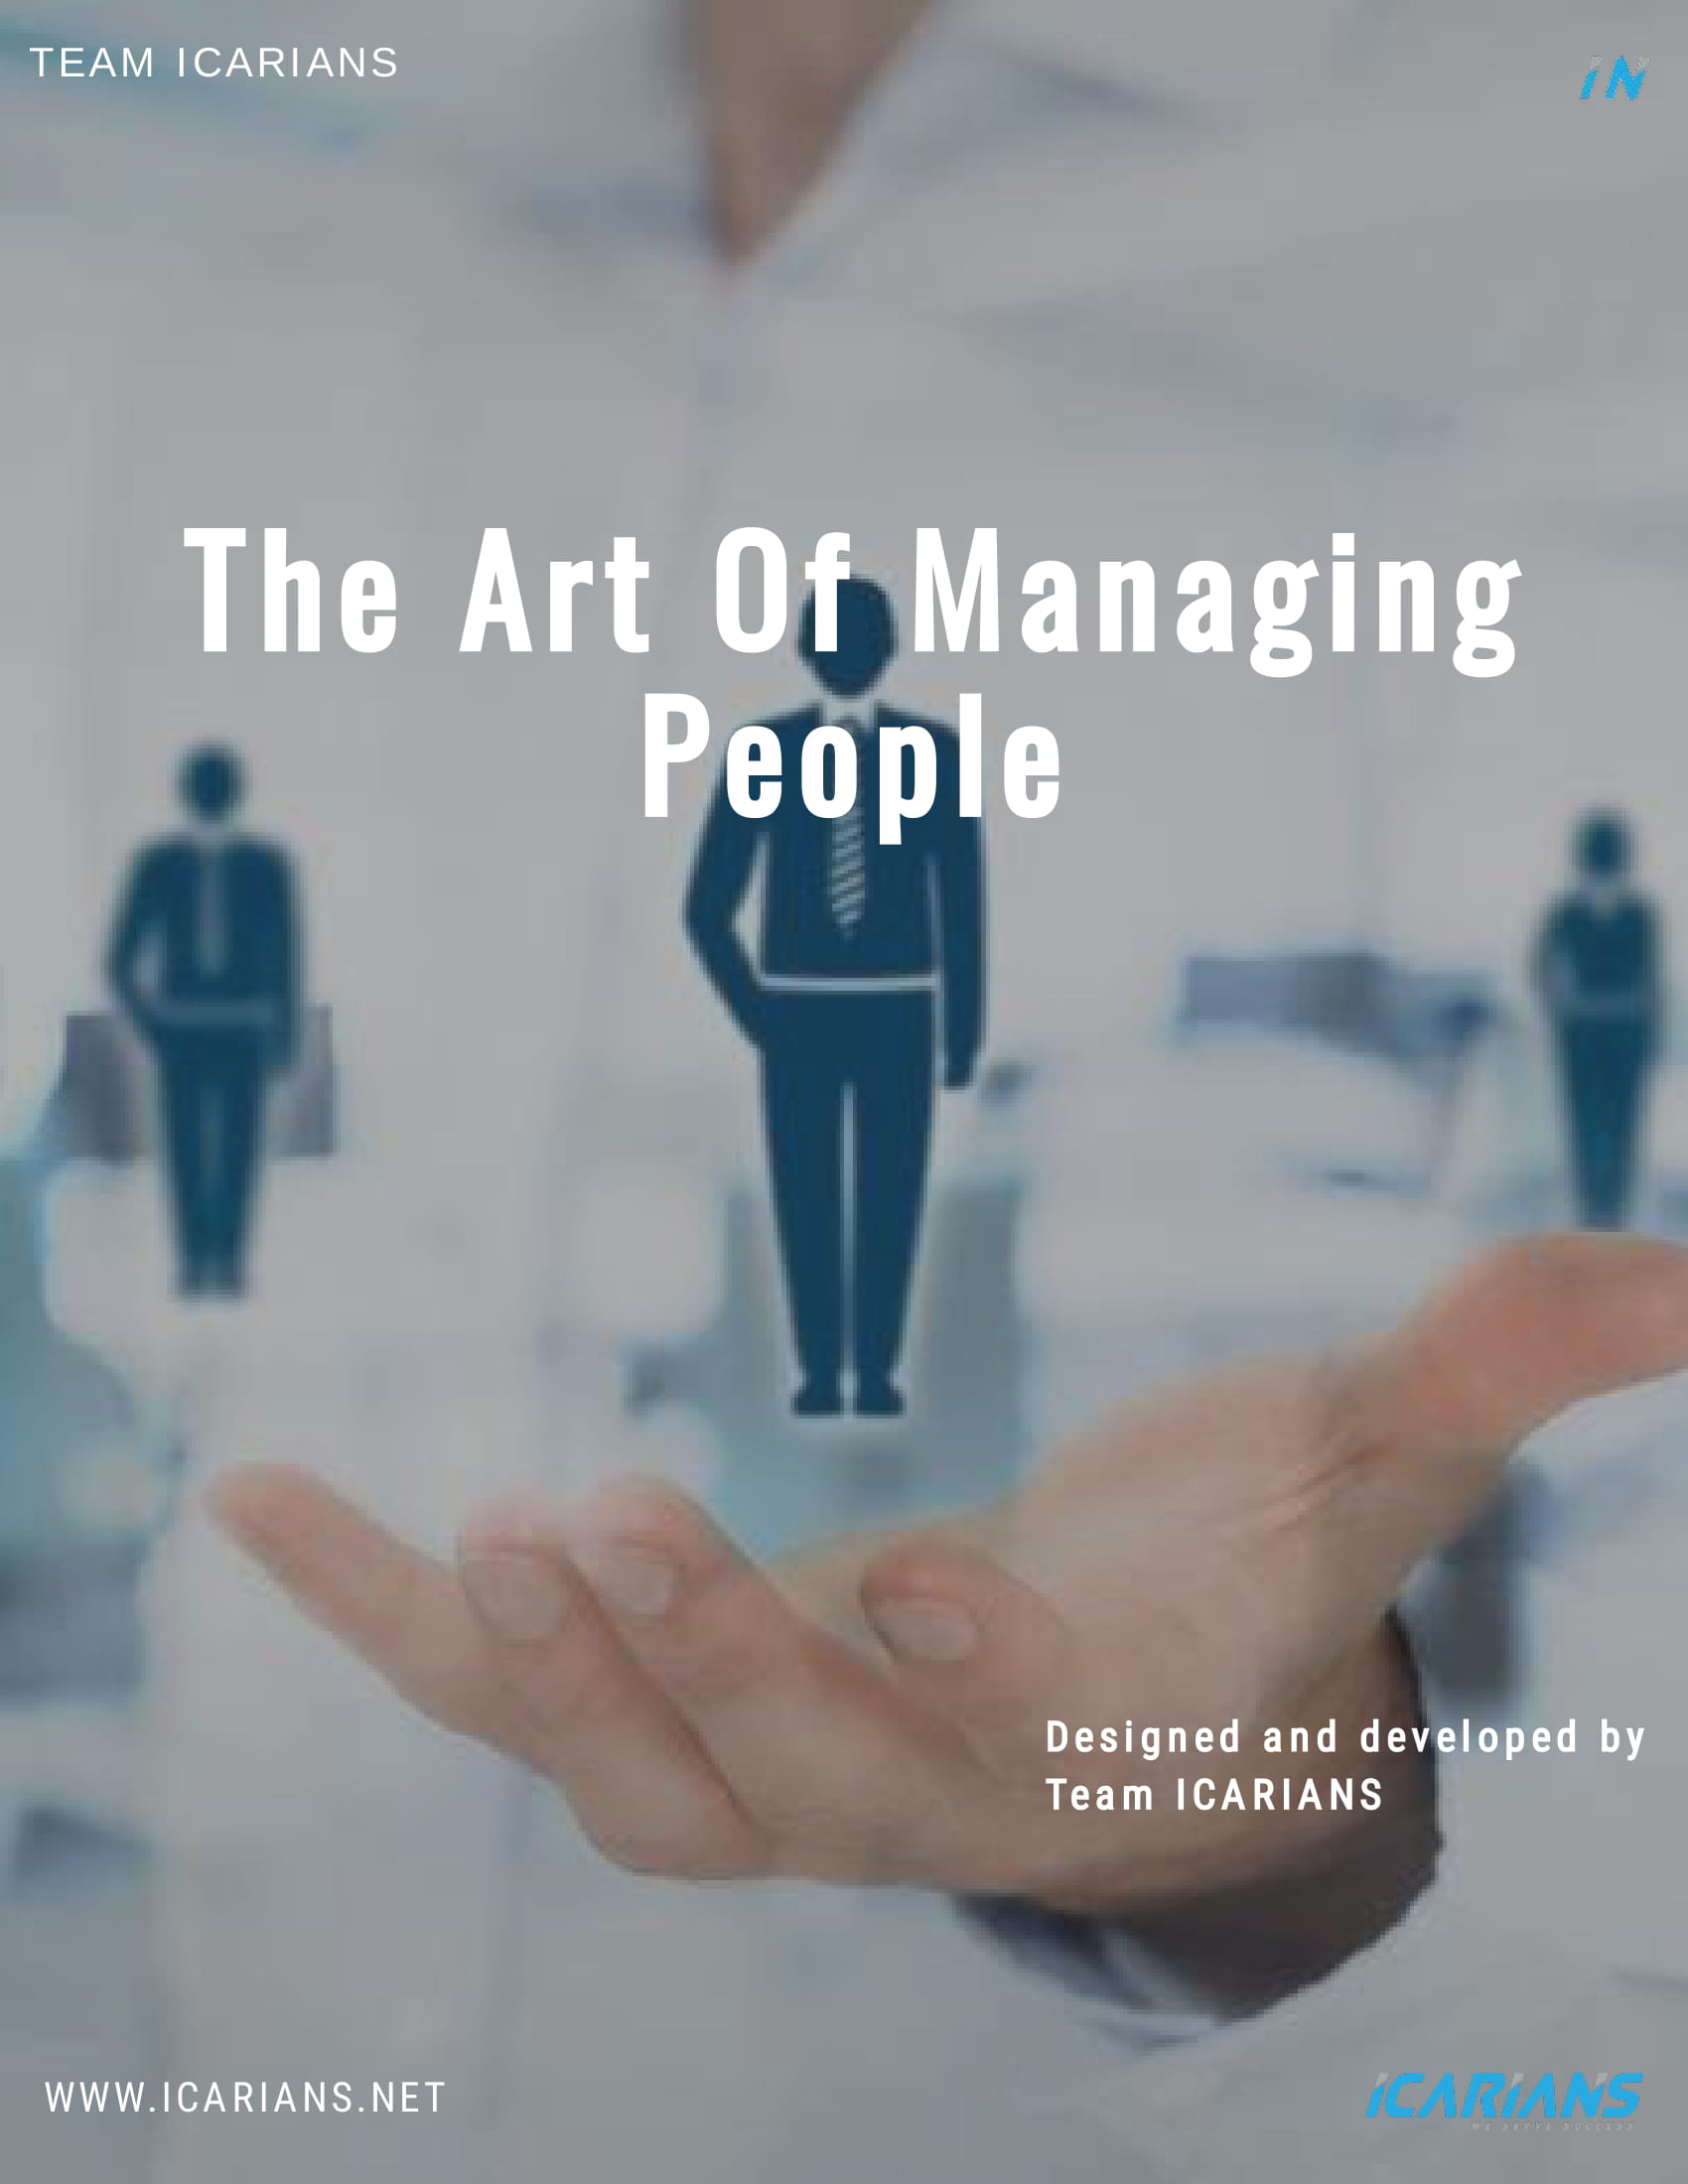 THE ART OF MANAGING PEOPLE